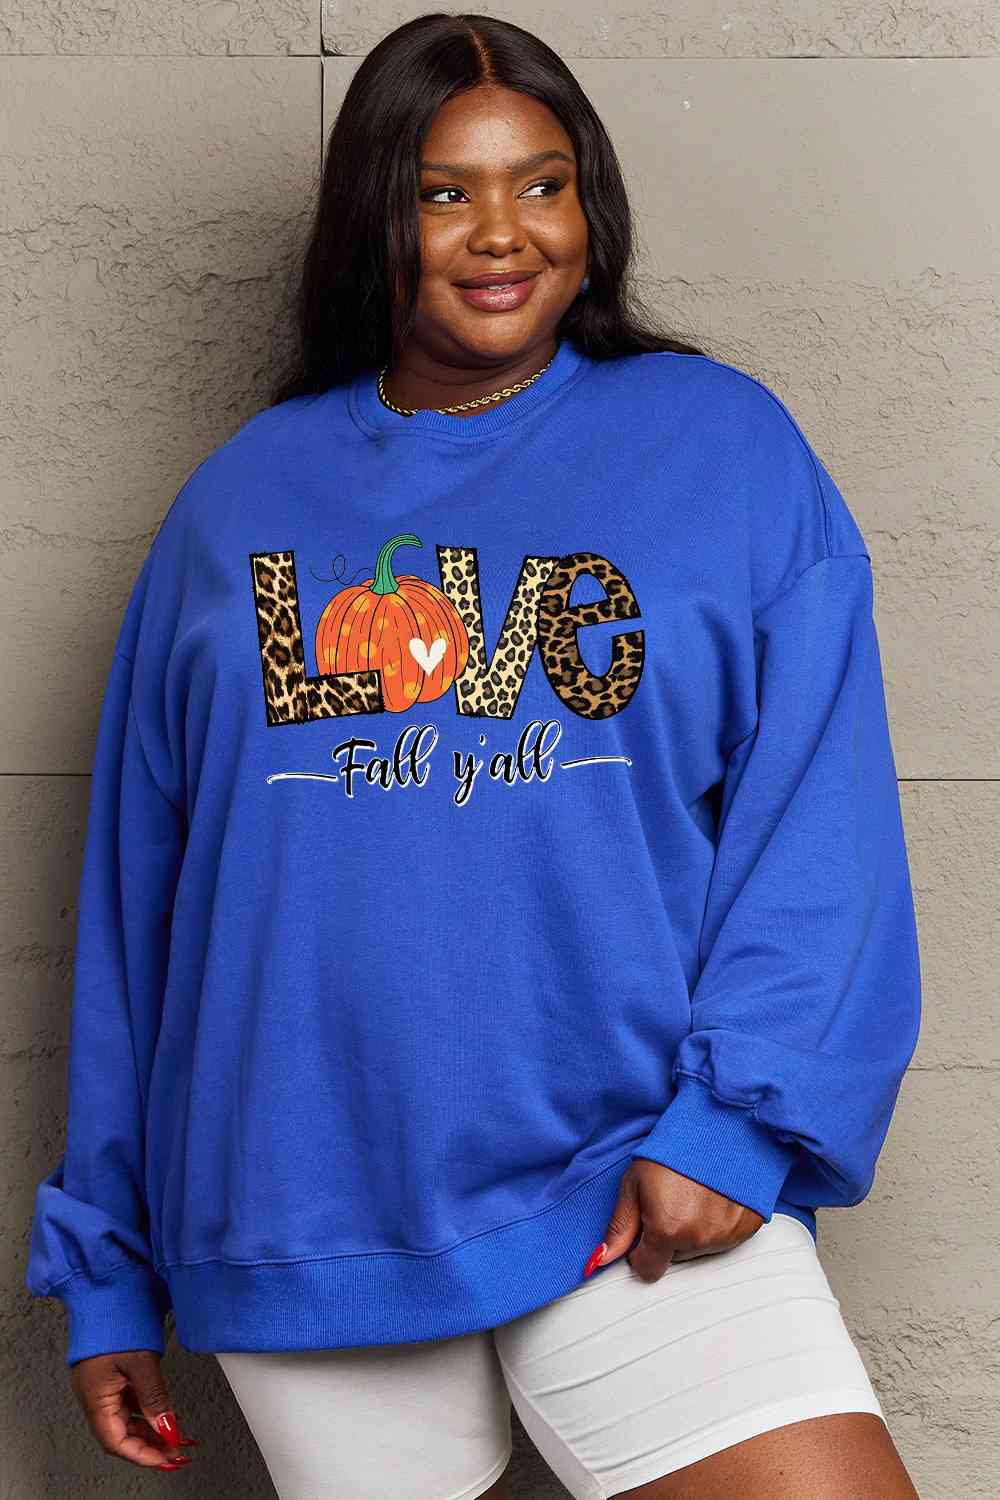 Simply Love Full Size LOVE FALL Y'ALL Graphic Sweatshirt - Guy Christopher